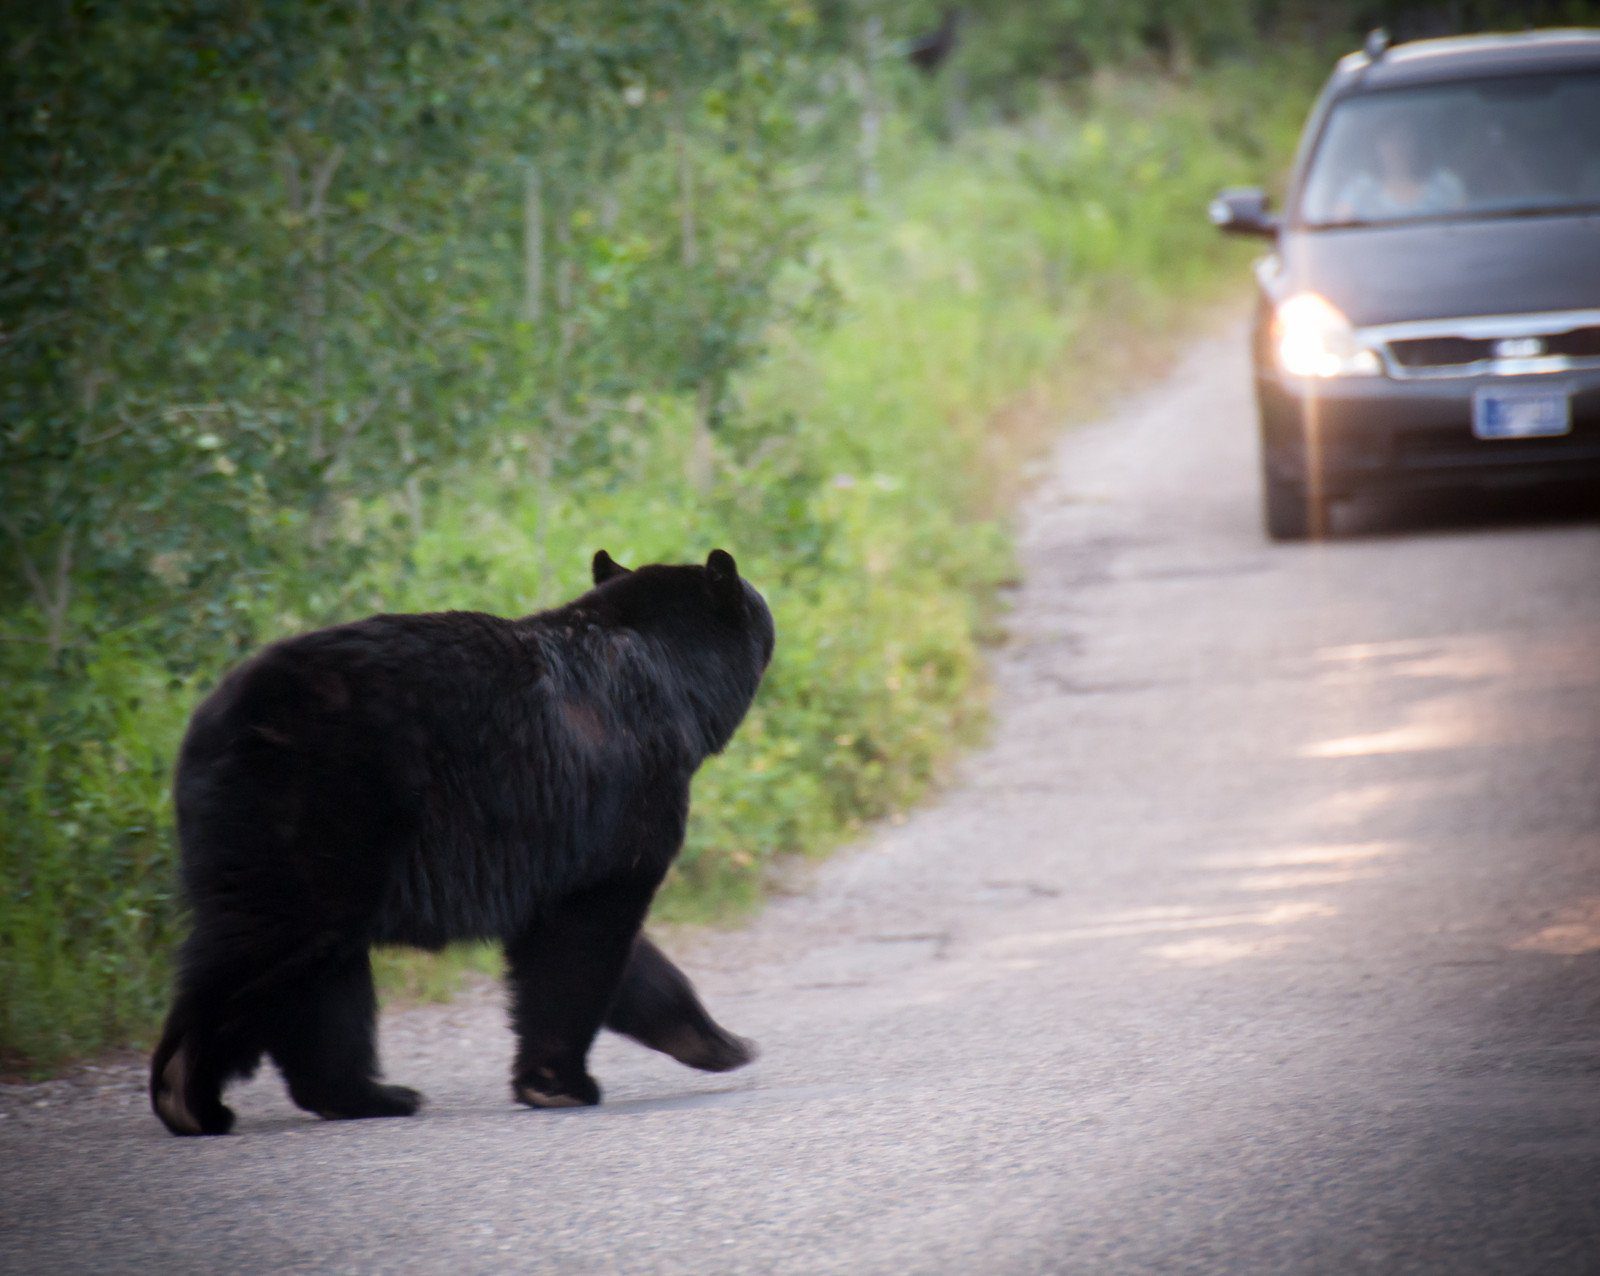 Getting a bit too close to a bear along the Canadian Icefields Parkway